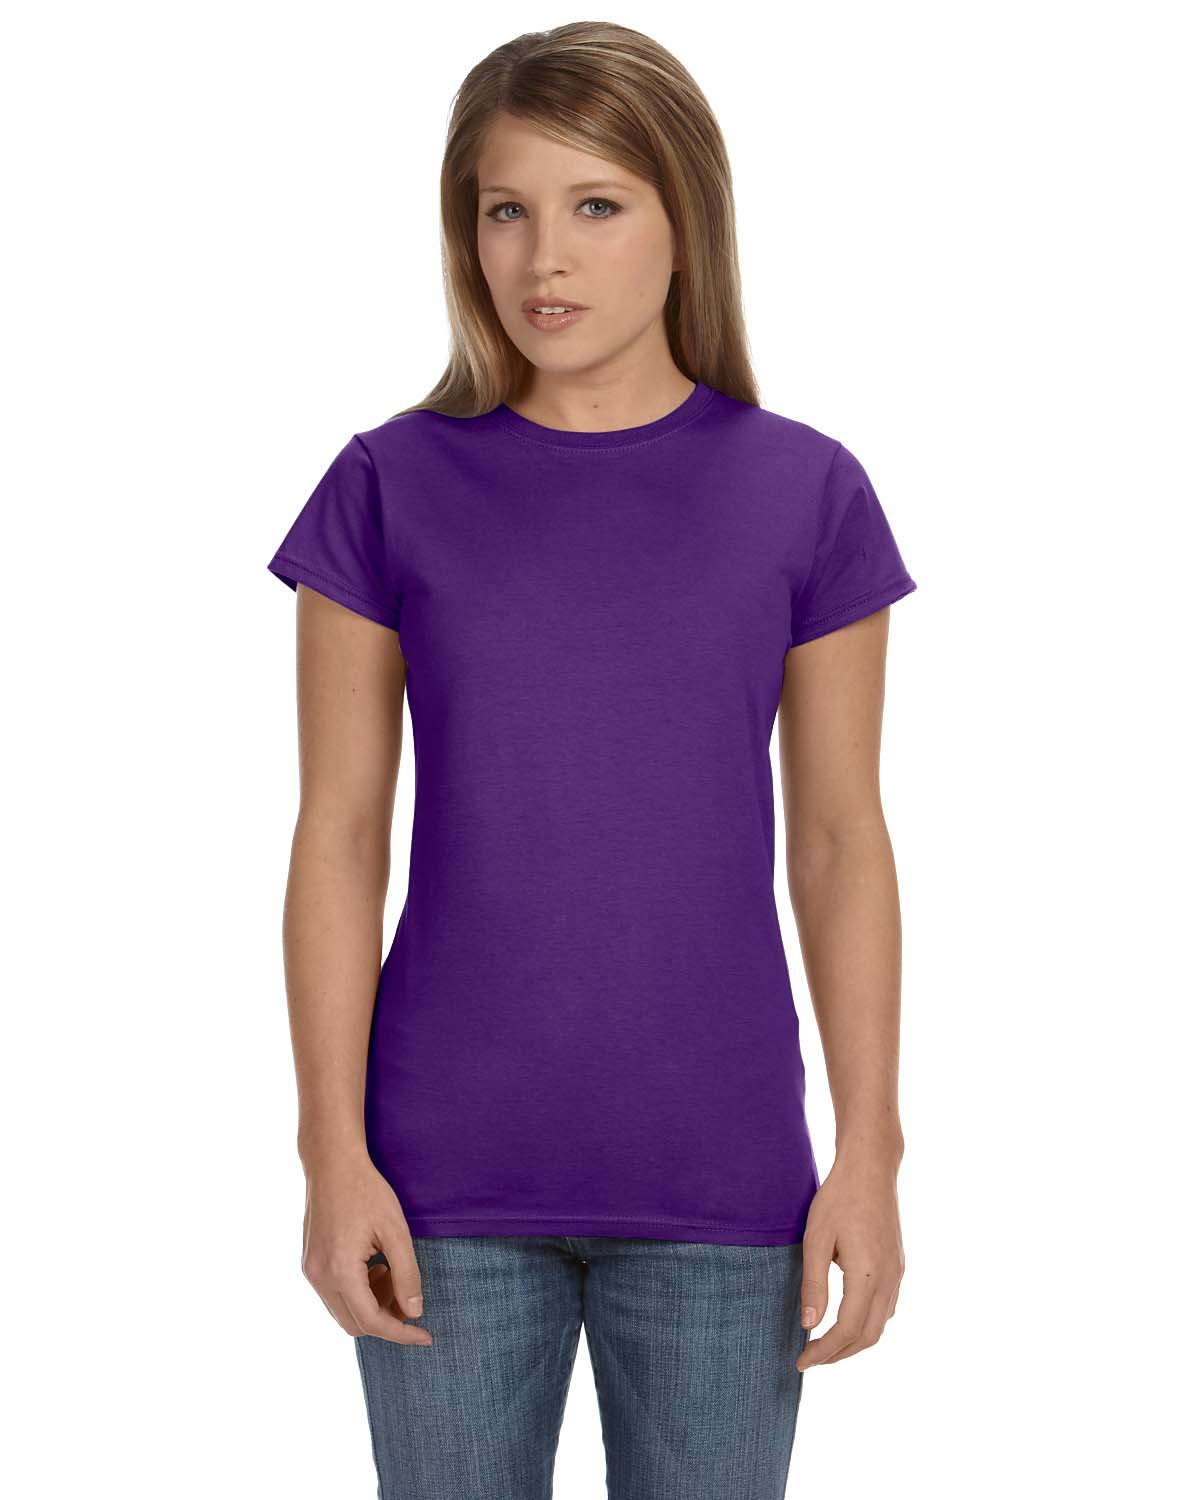 Gildan Ladies' Softstyle® Fitted T-Shirt PURPLE 